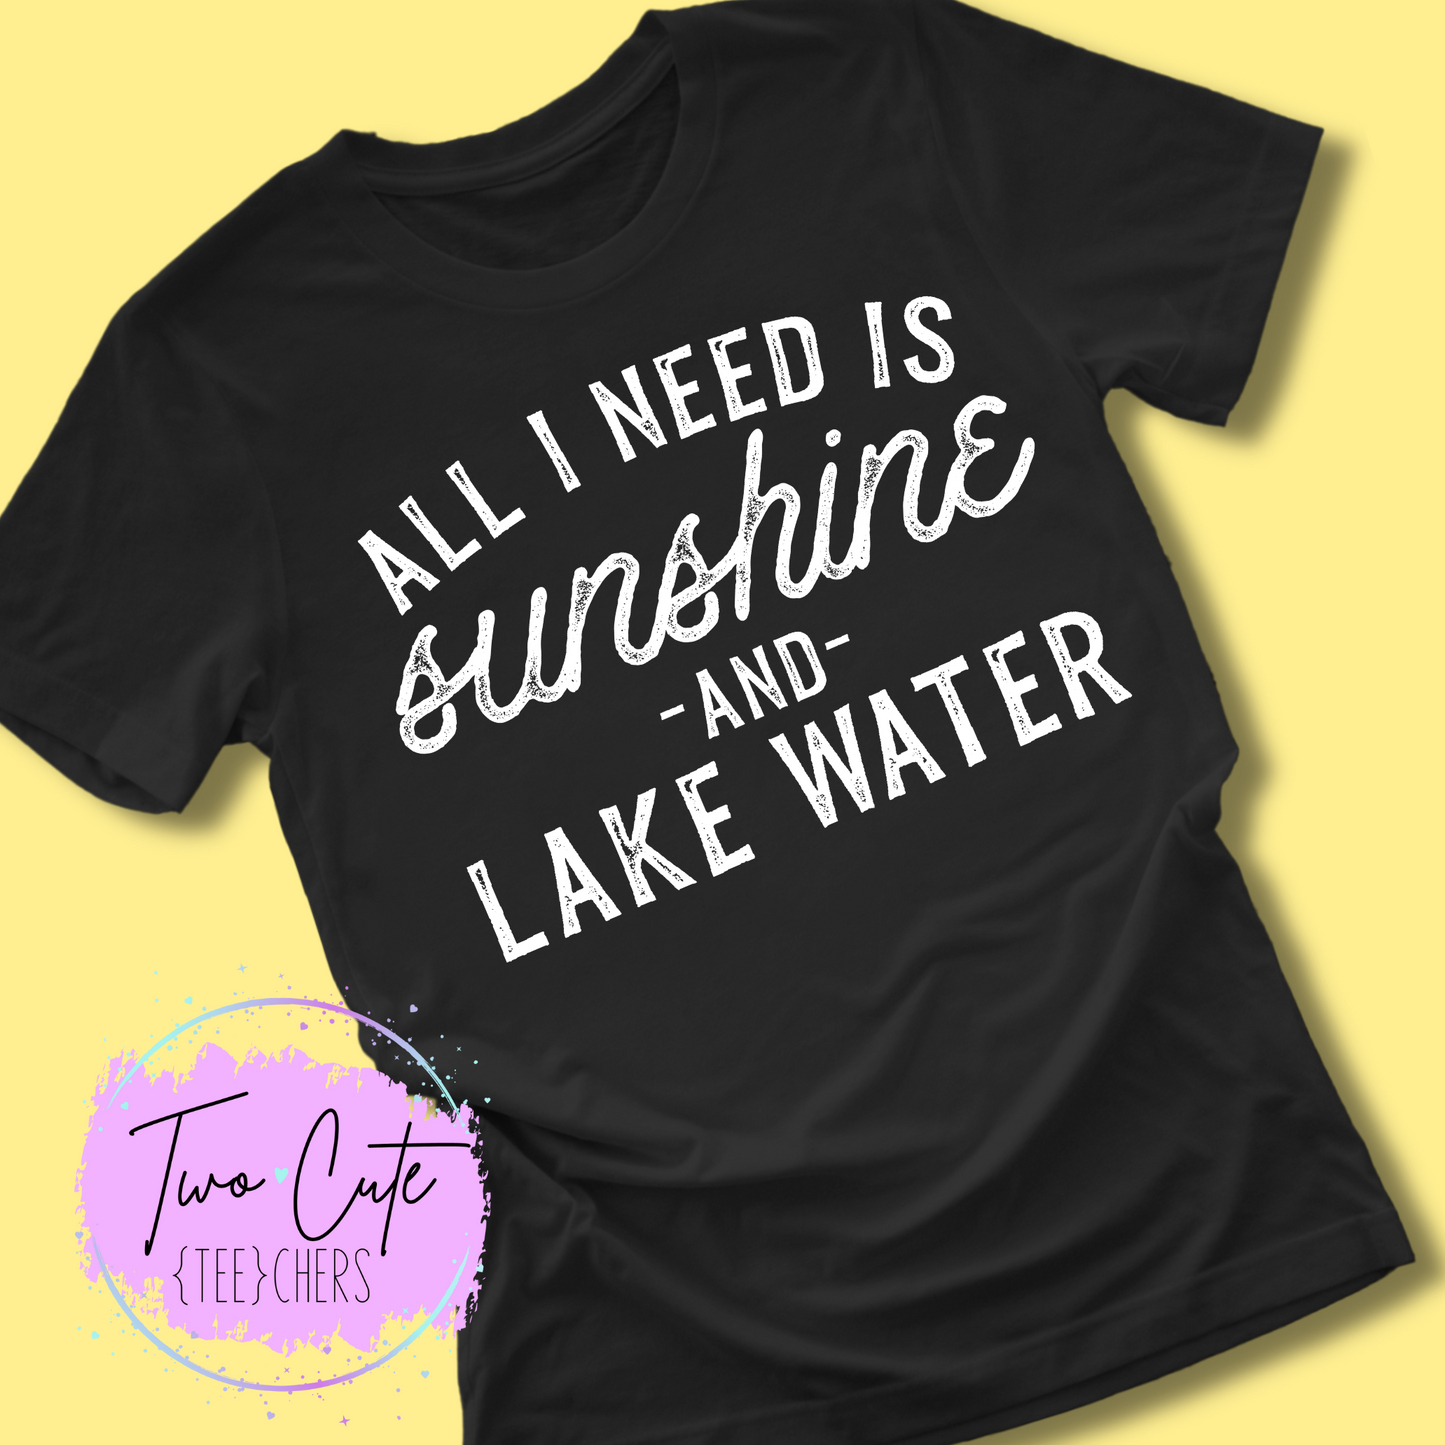 All I Need is Sunshine and Lake Water